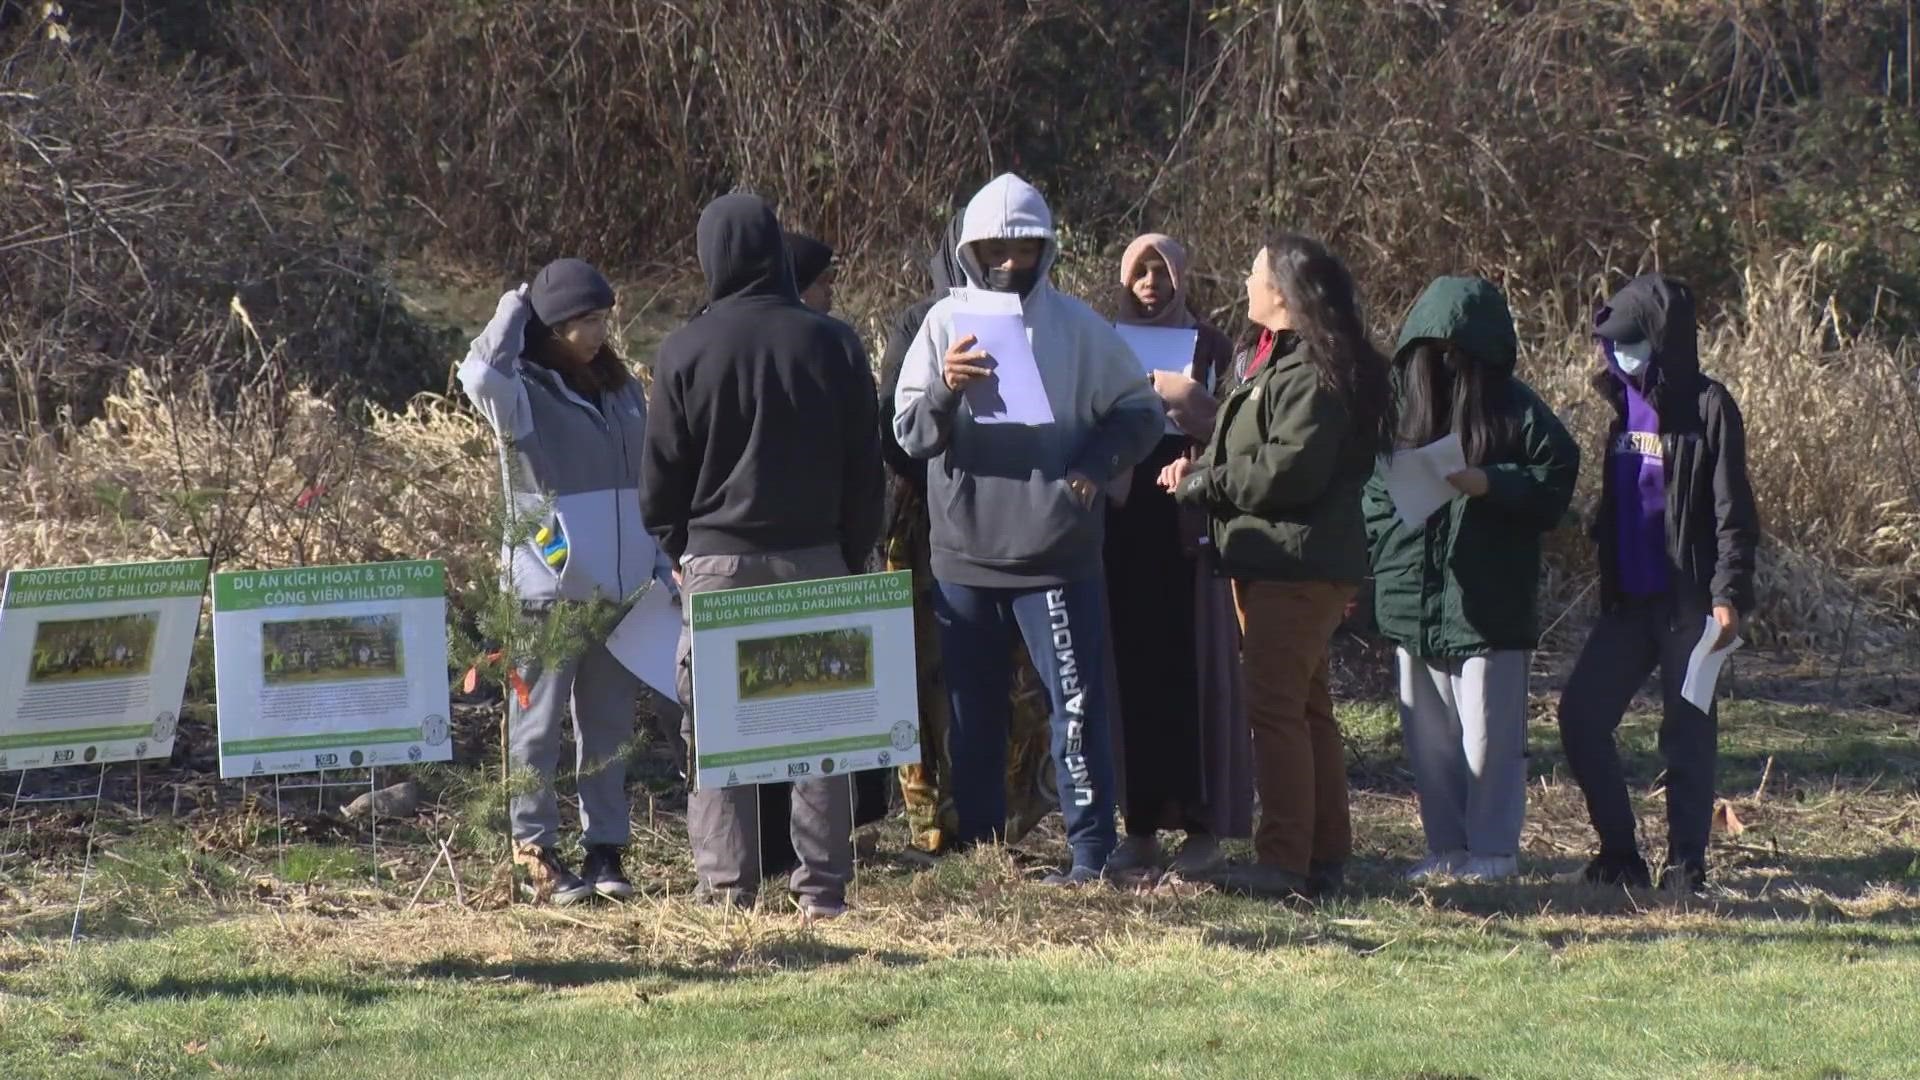 The DNR Friday highlighted its grant program that empowered dozens of students to plant hundreds of trees at Burien's Hilltop Park.